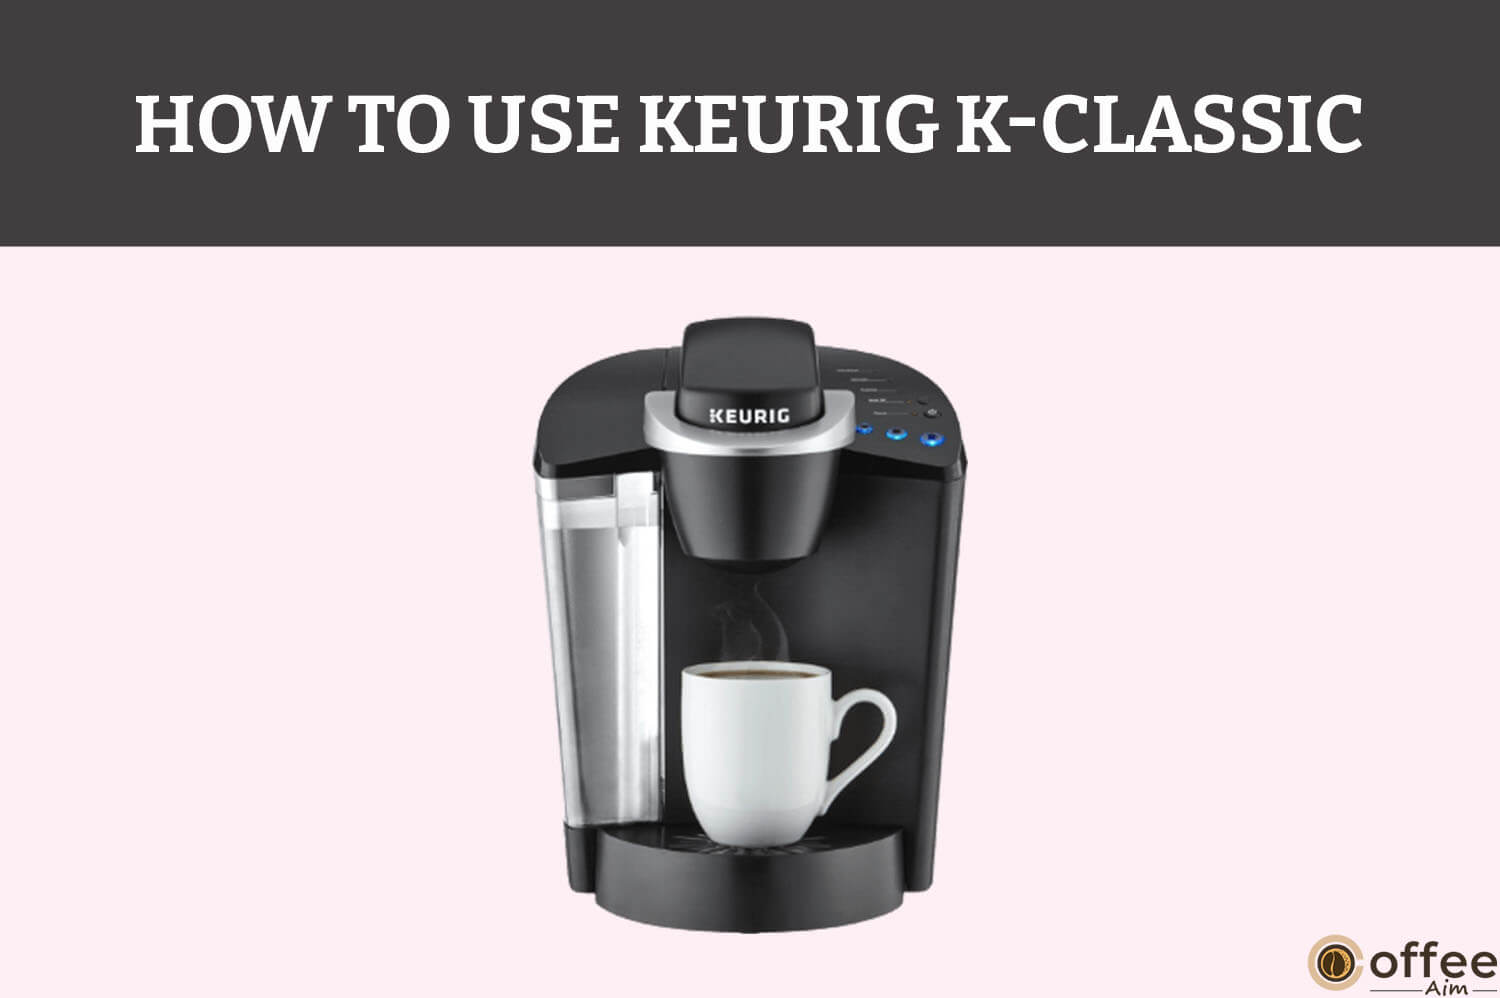 Featured image for the article "How to Use Keurig K-Classic"